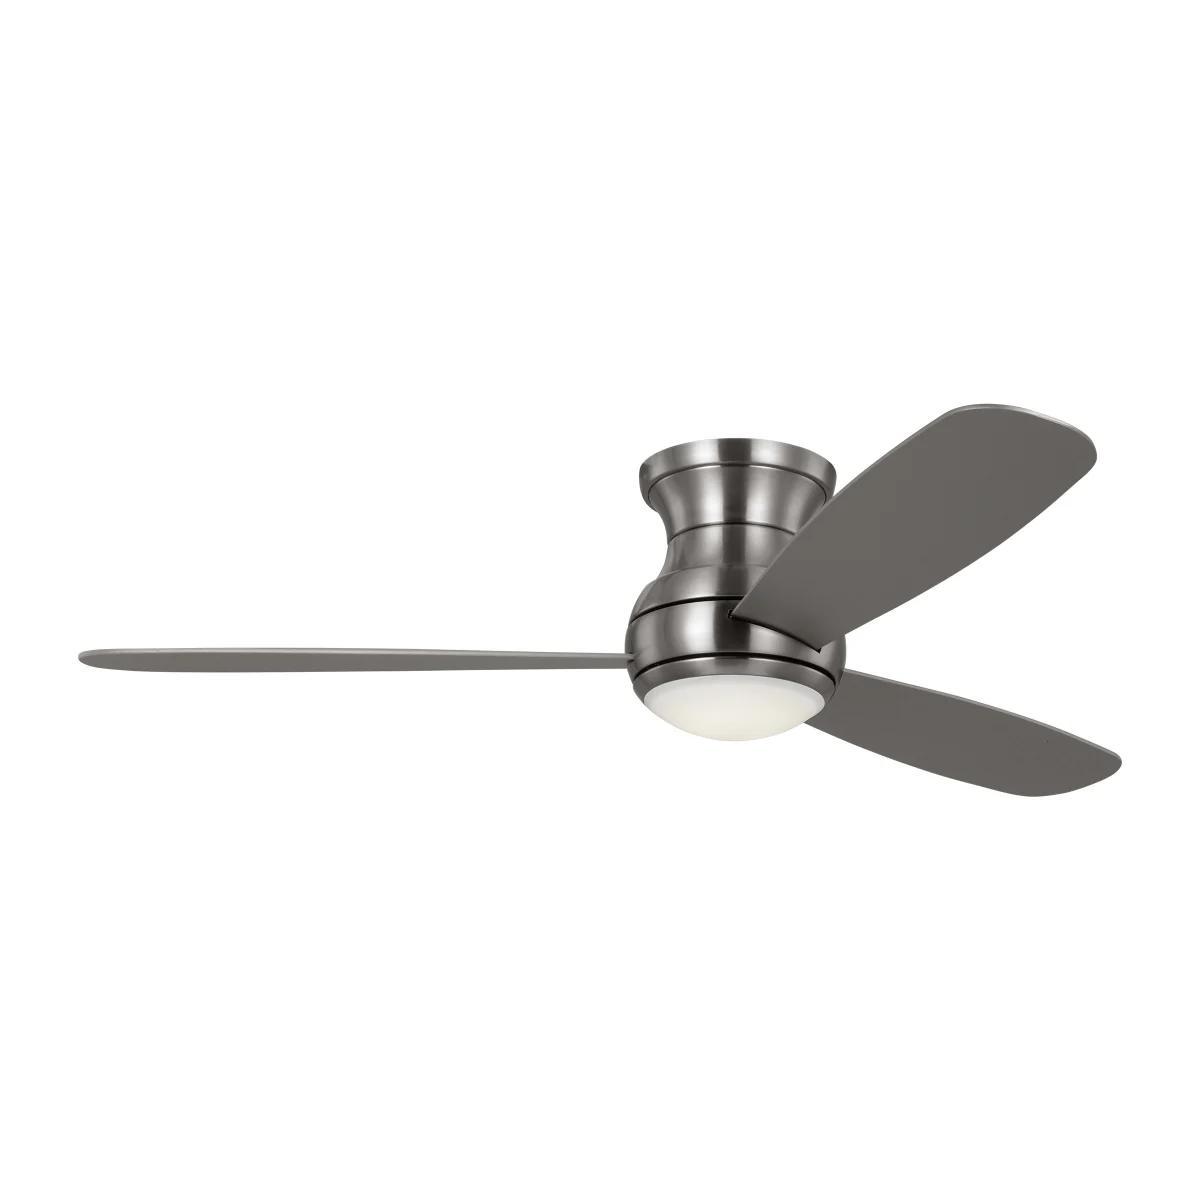 Orbis 52 Inch Hugger LED Ceiling Fan With Wall Control